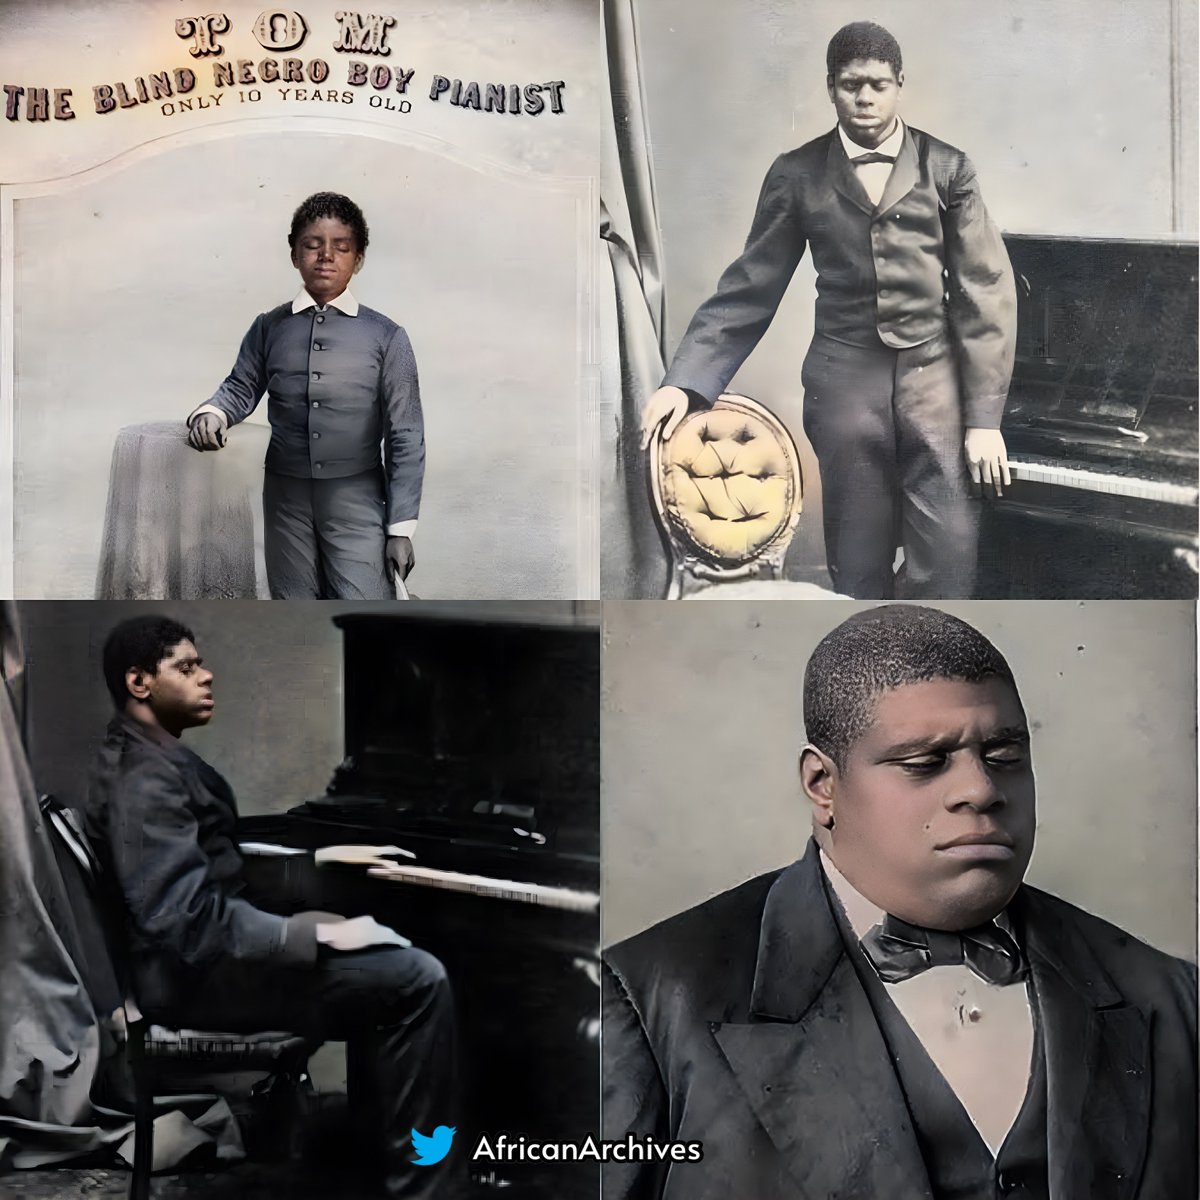 Blind Tom' Wiggins was an African American musical prodigy. Born blind, as an infant he Tom Wiggins was sold into slavery, along with the rest of his family. He also survived attempted murder as he had no economic value to his owners. However, Tom had access to a piano, and his